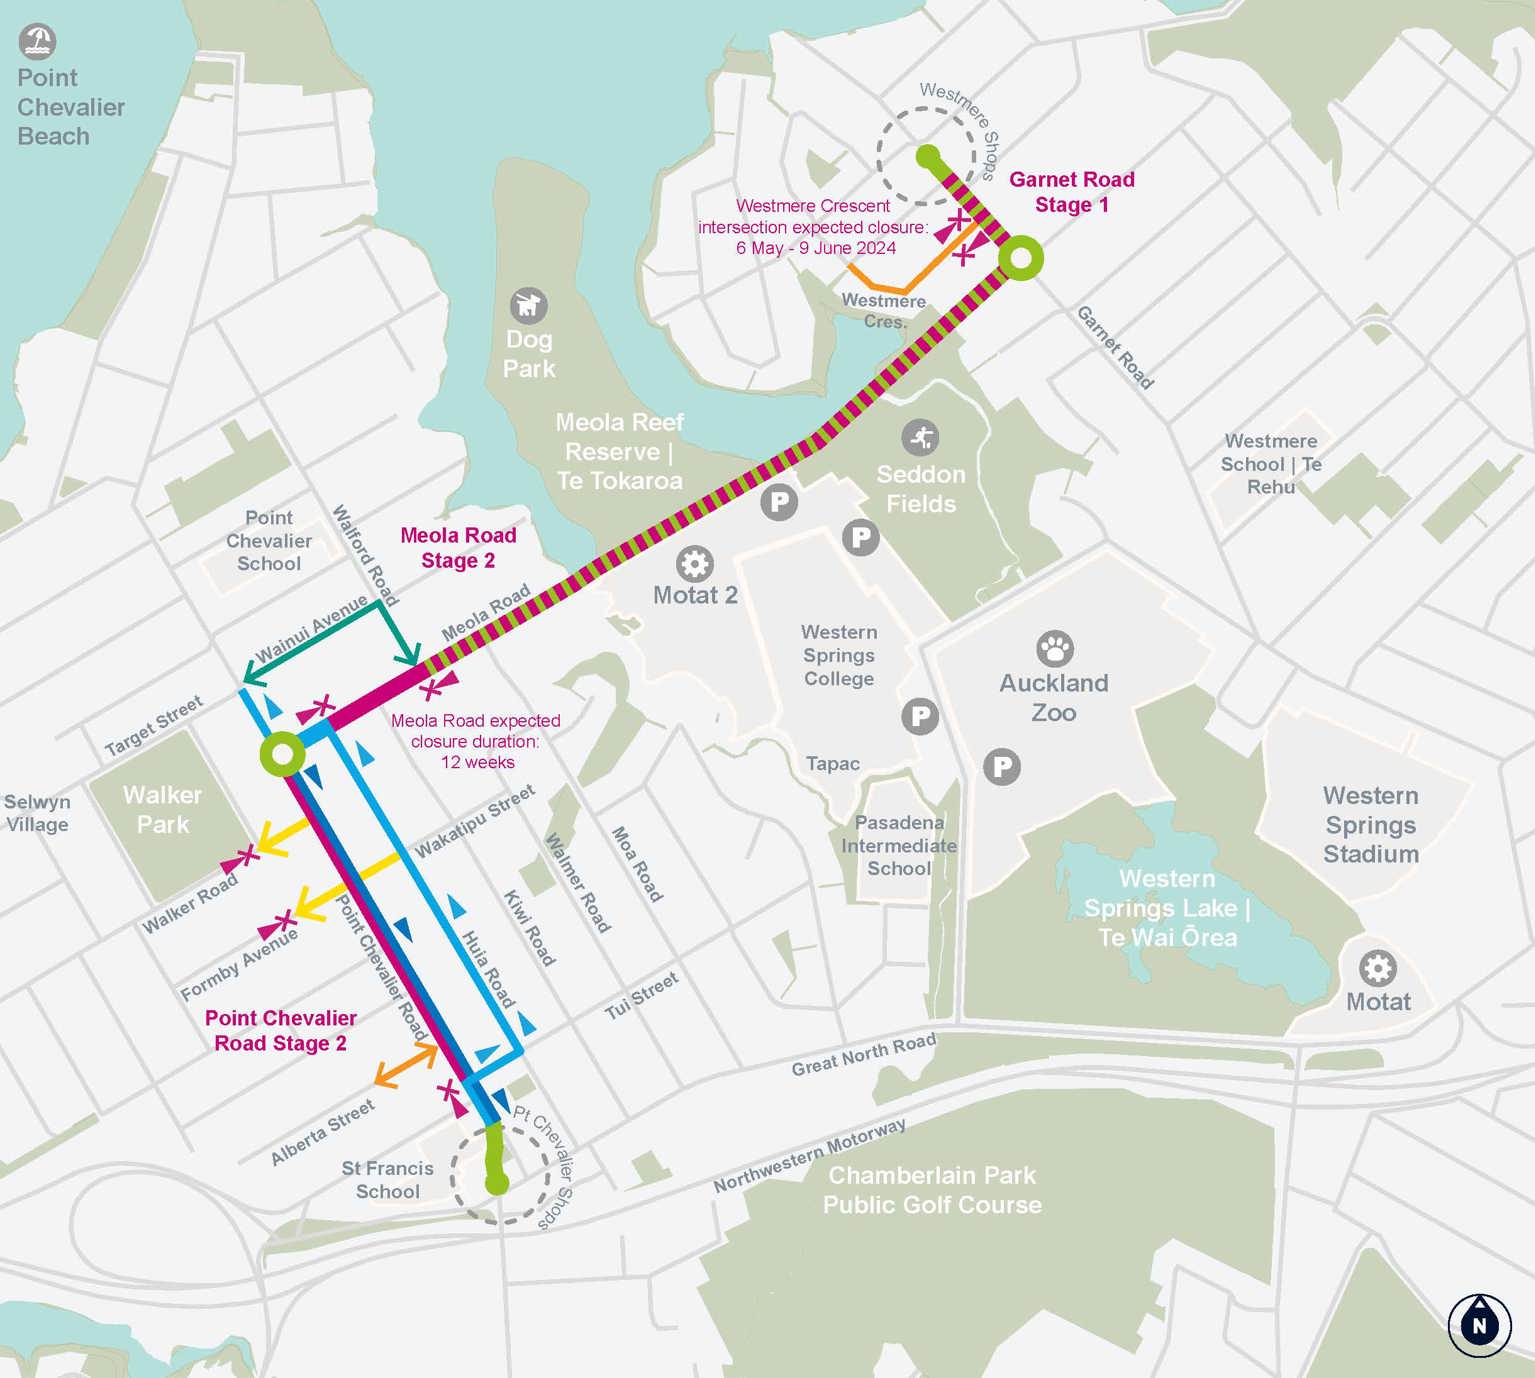 Map showing next stage of the project for Meola Road, Point Chevalier and Garnet Road 28 April to December 2024